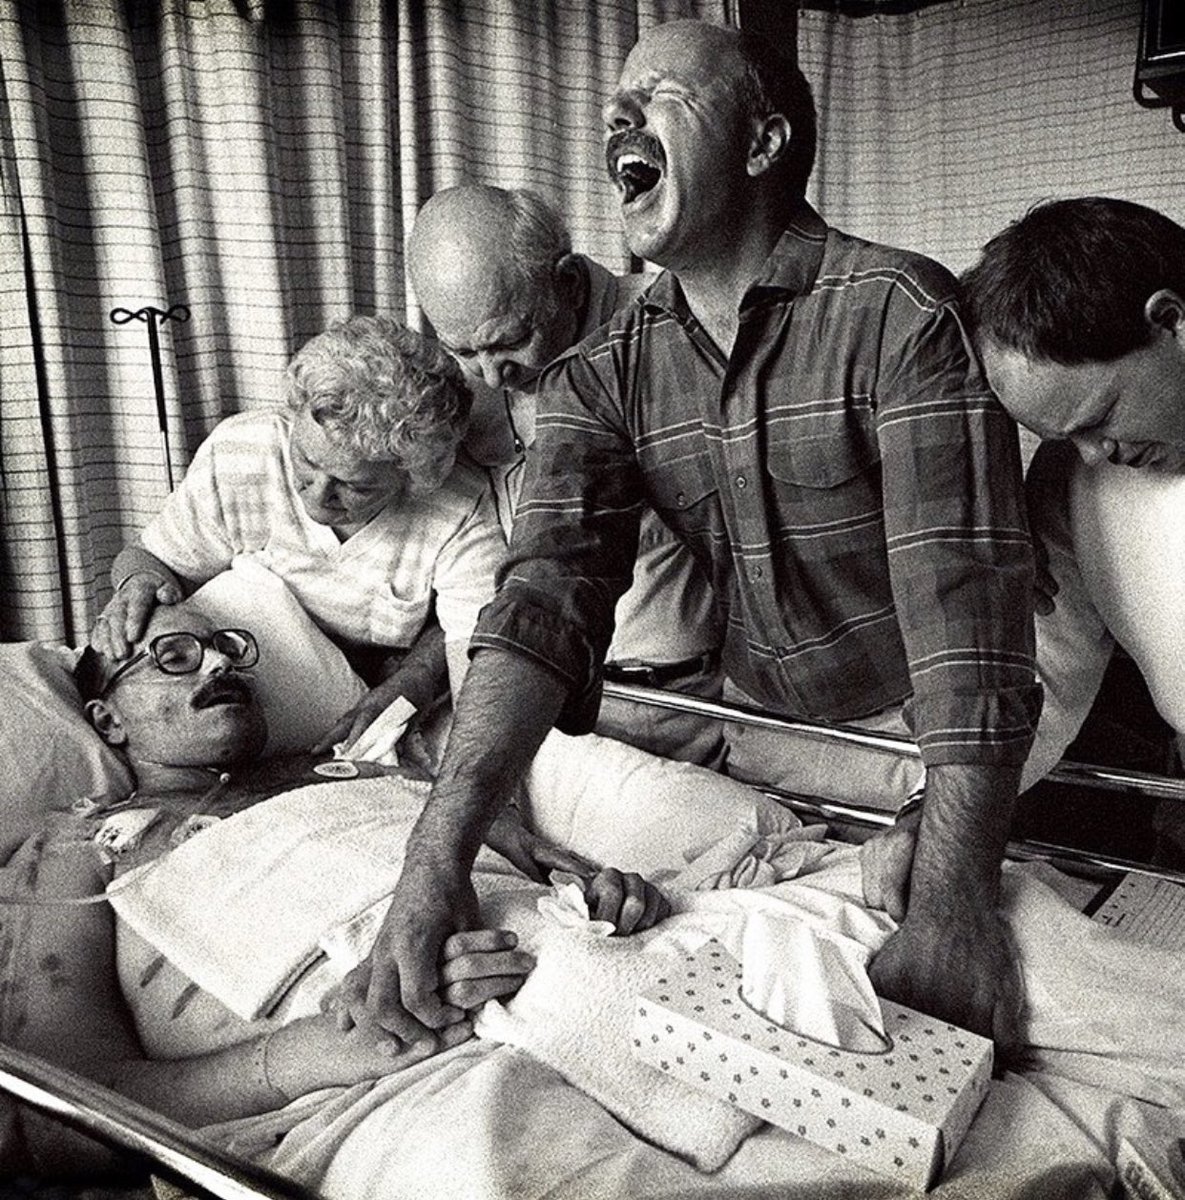 Captured in 1989 by Michael Schwarz, this photograph depicts 33-year-old Tom Fox during his final moments before he died from AIDS. He was surrounded by his family at Sacred Heart Hospital in Eugene, Oregon.